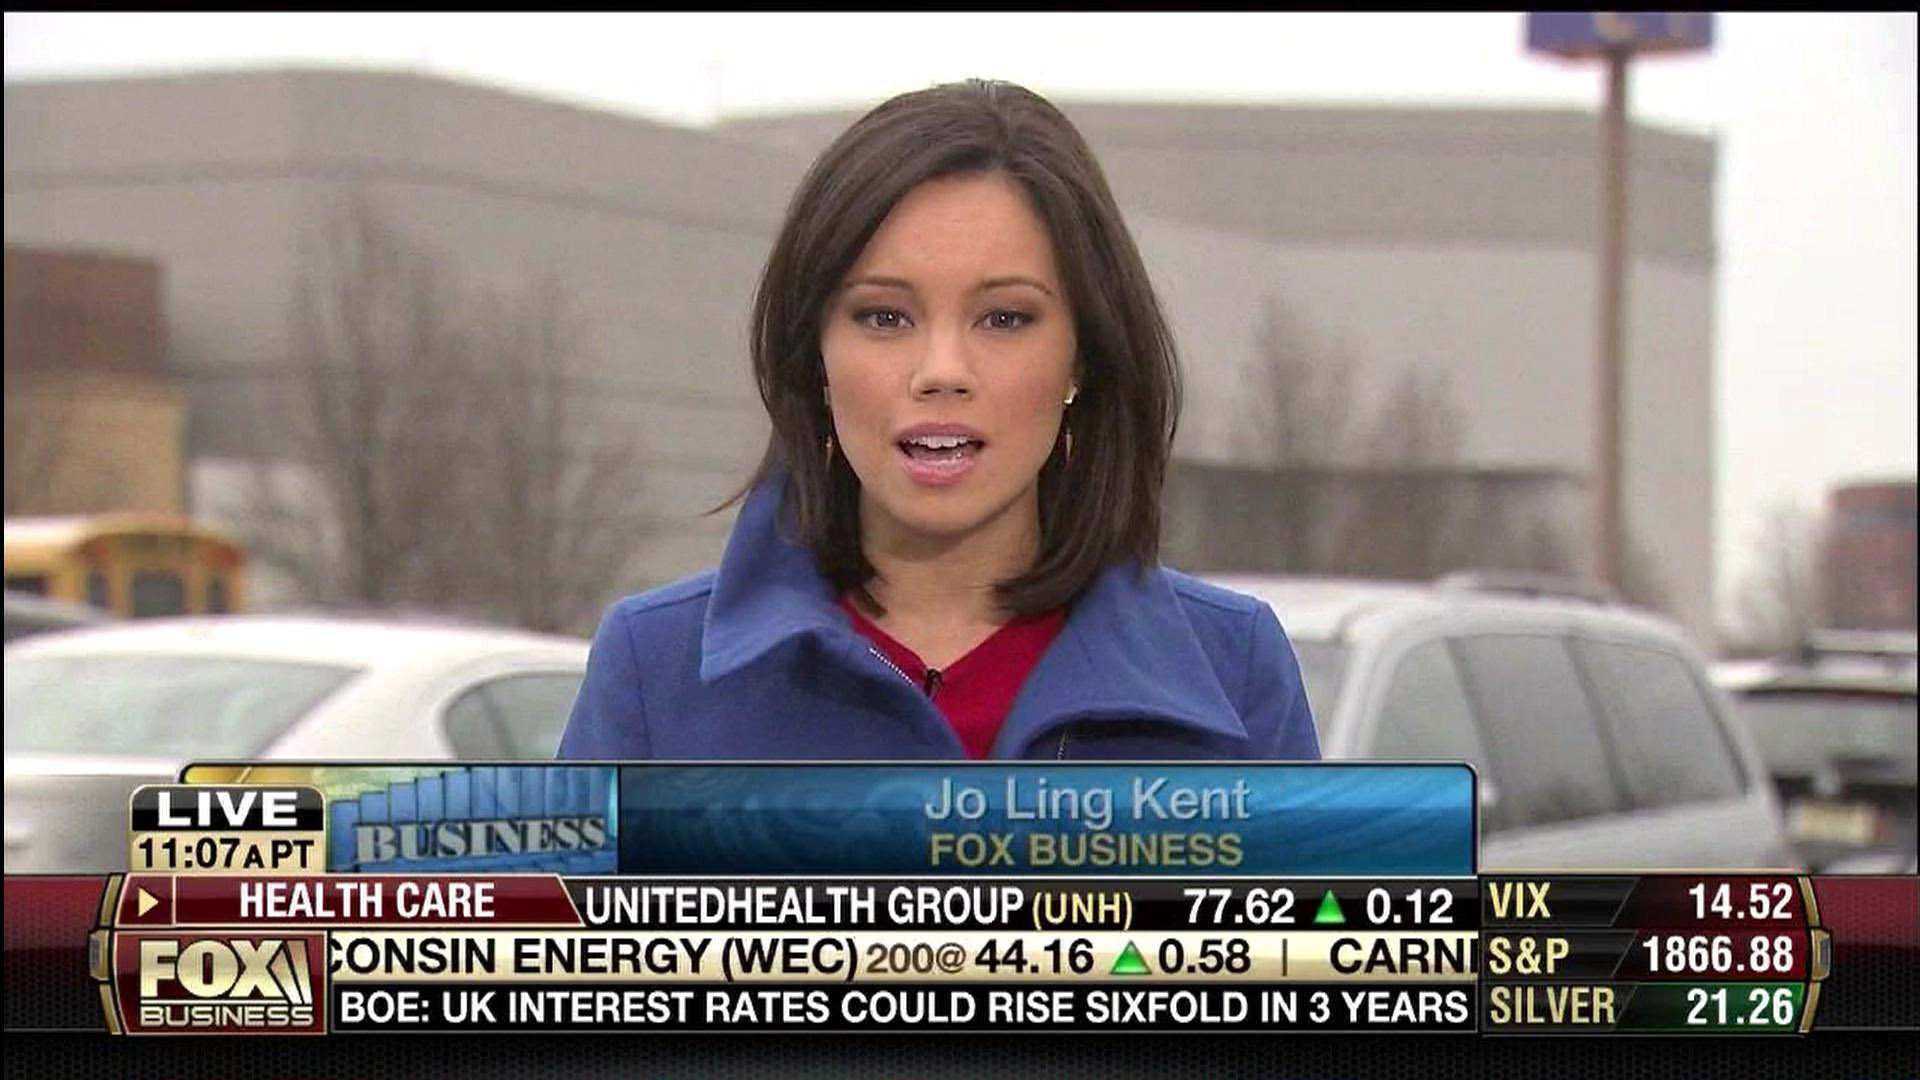 Jo Ling Kent, who joined Fox Business Network as a reporter in May 2013, is...